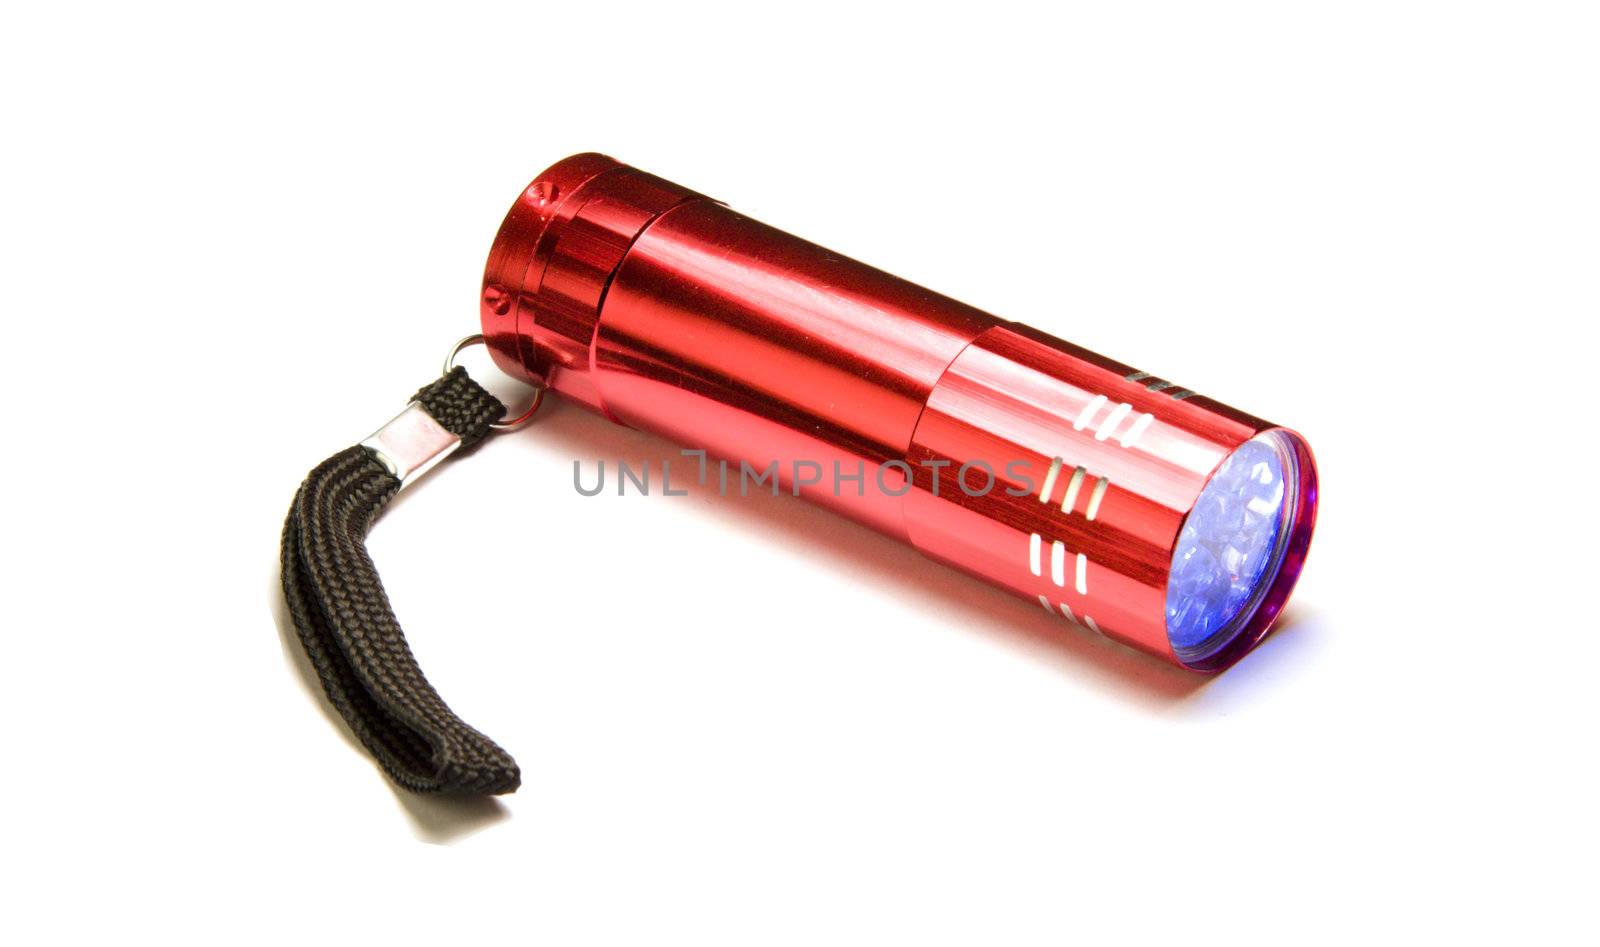 A small flashlight over white background